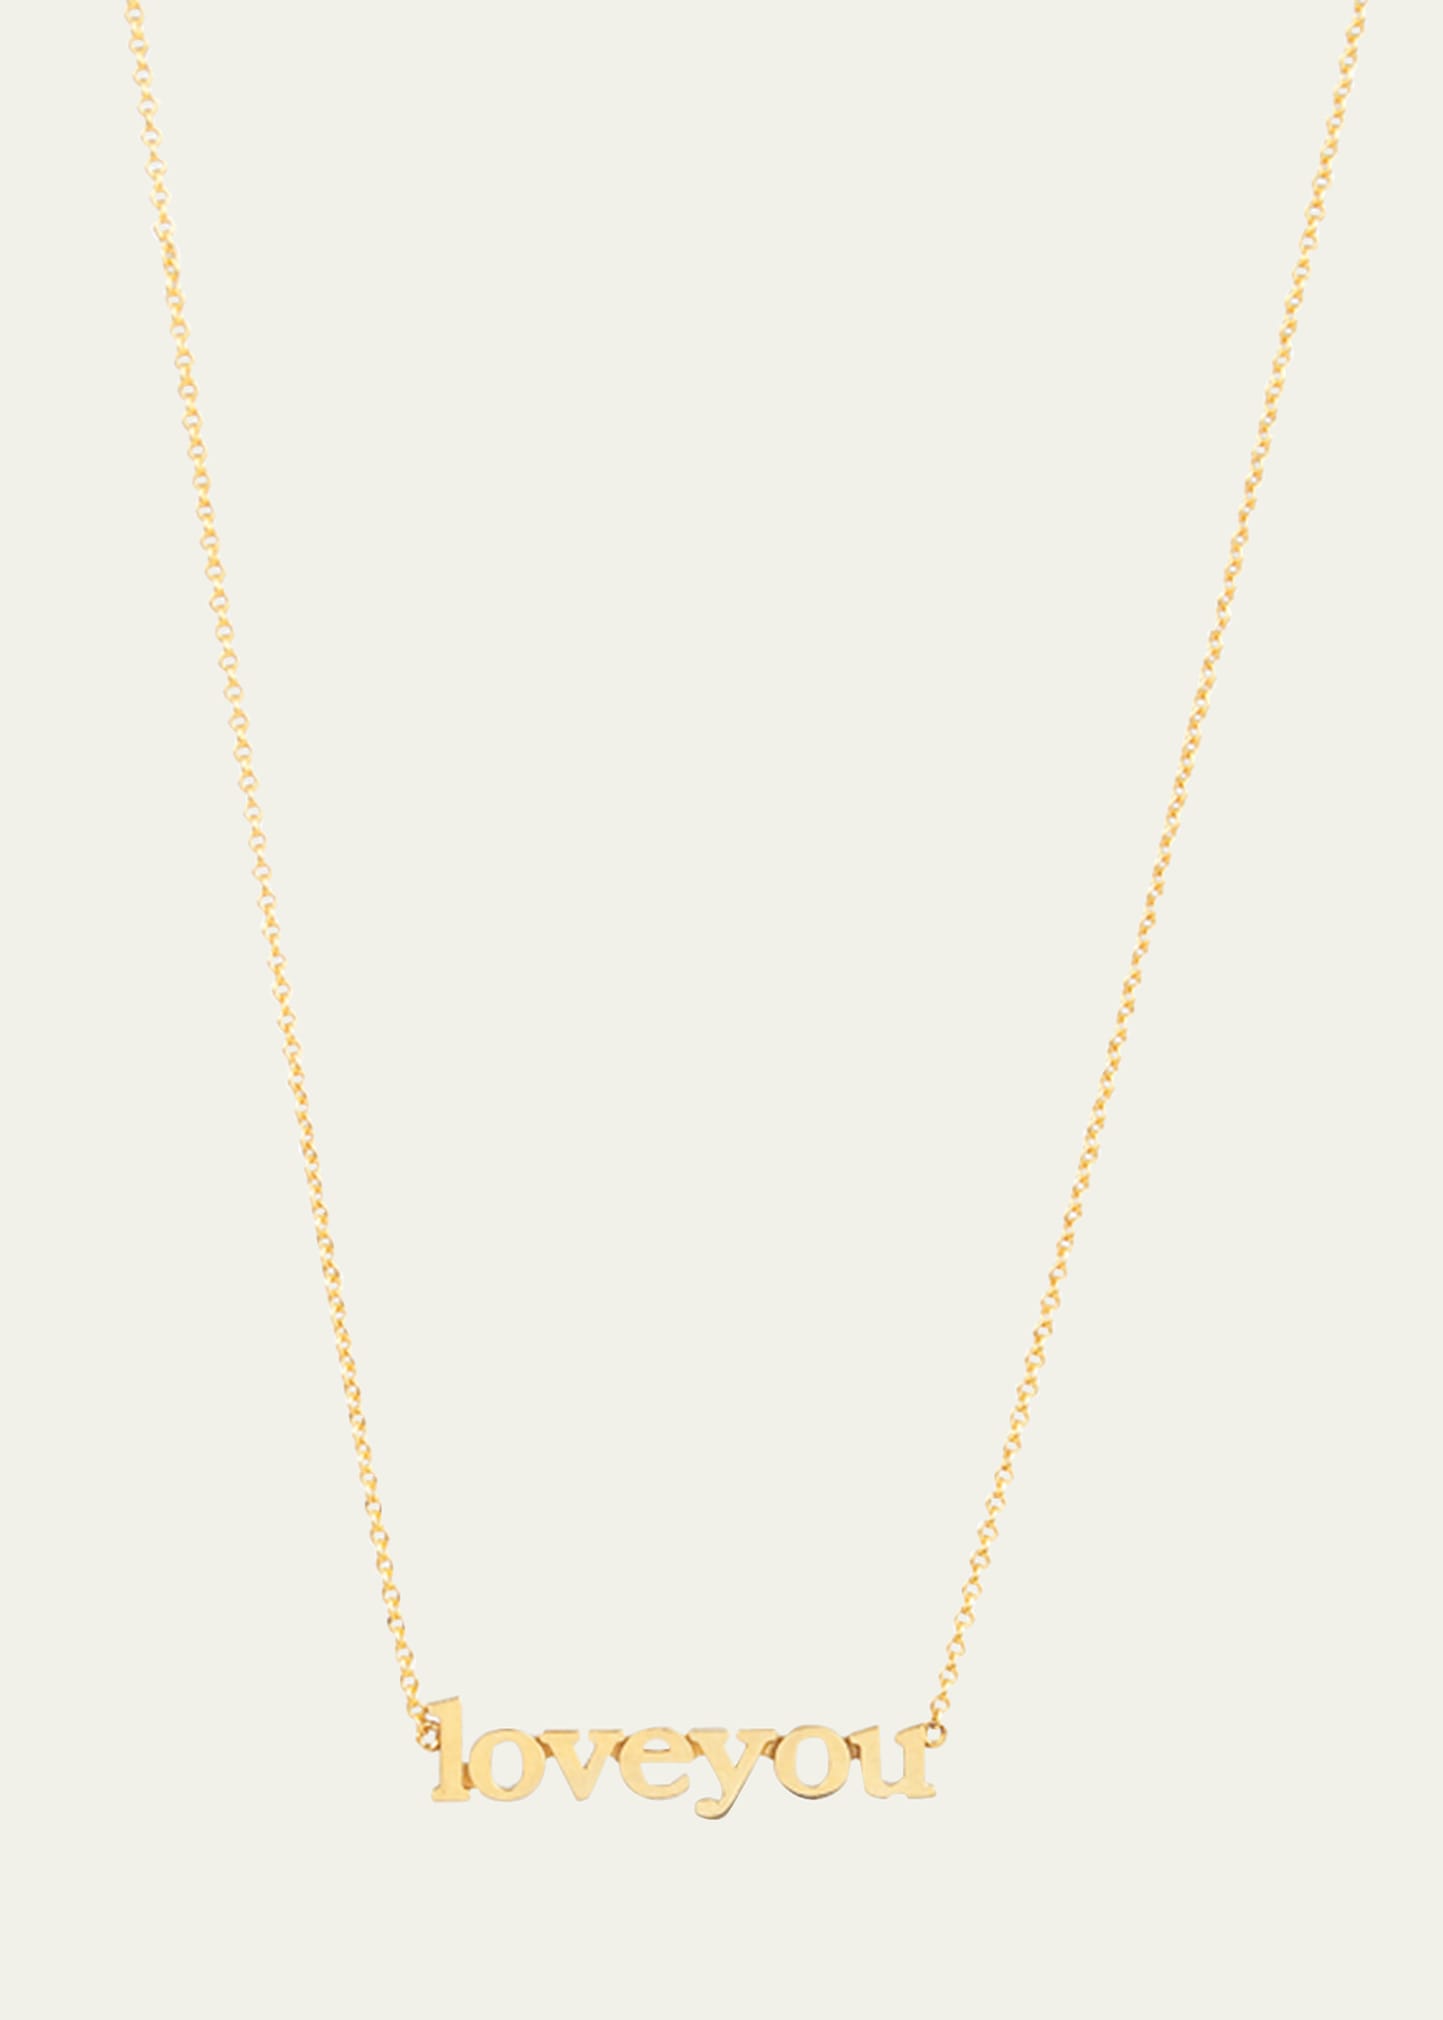 18k Love You Necklace